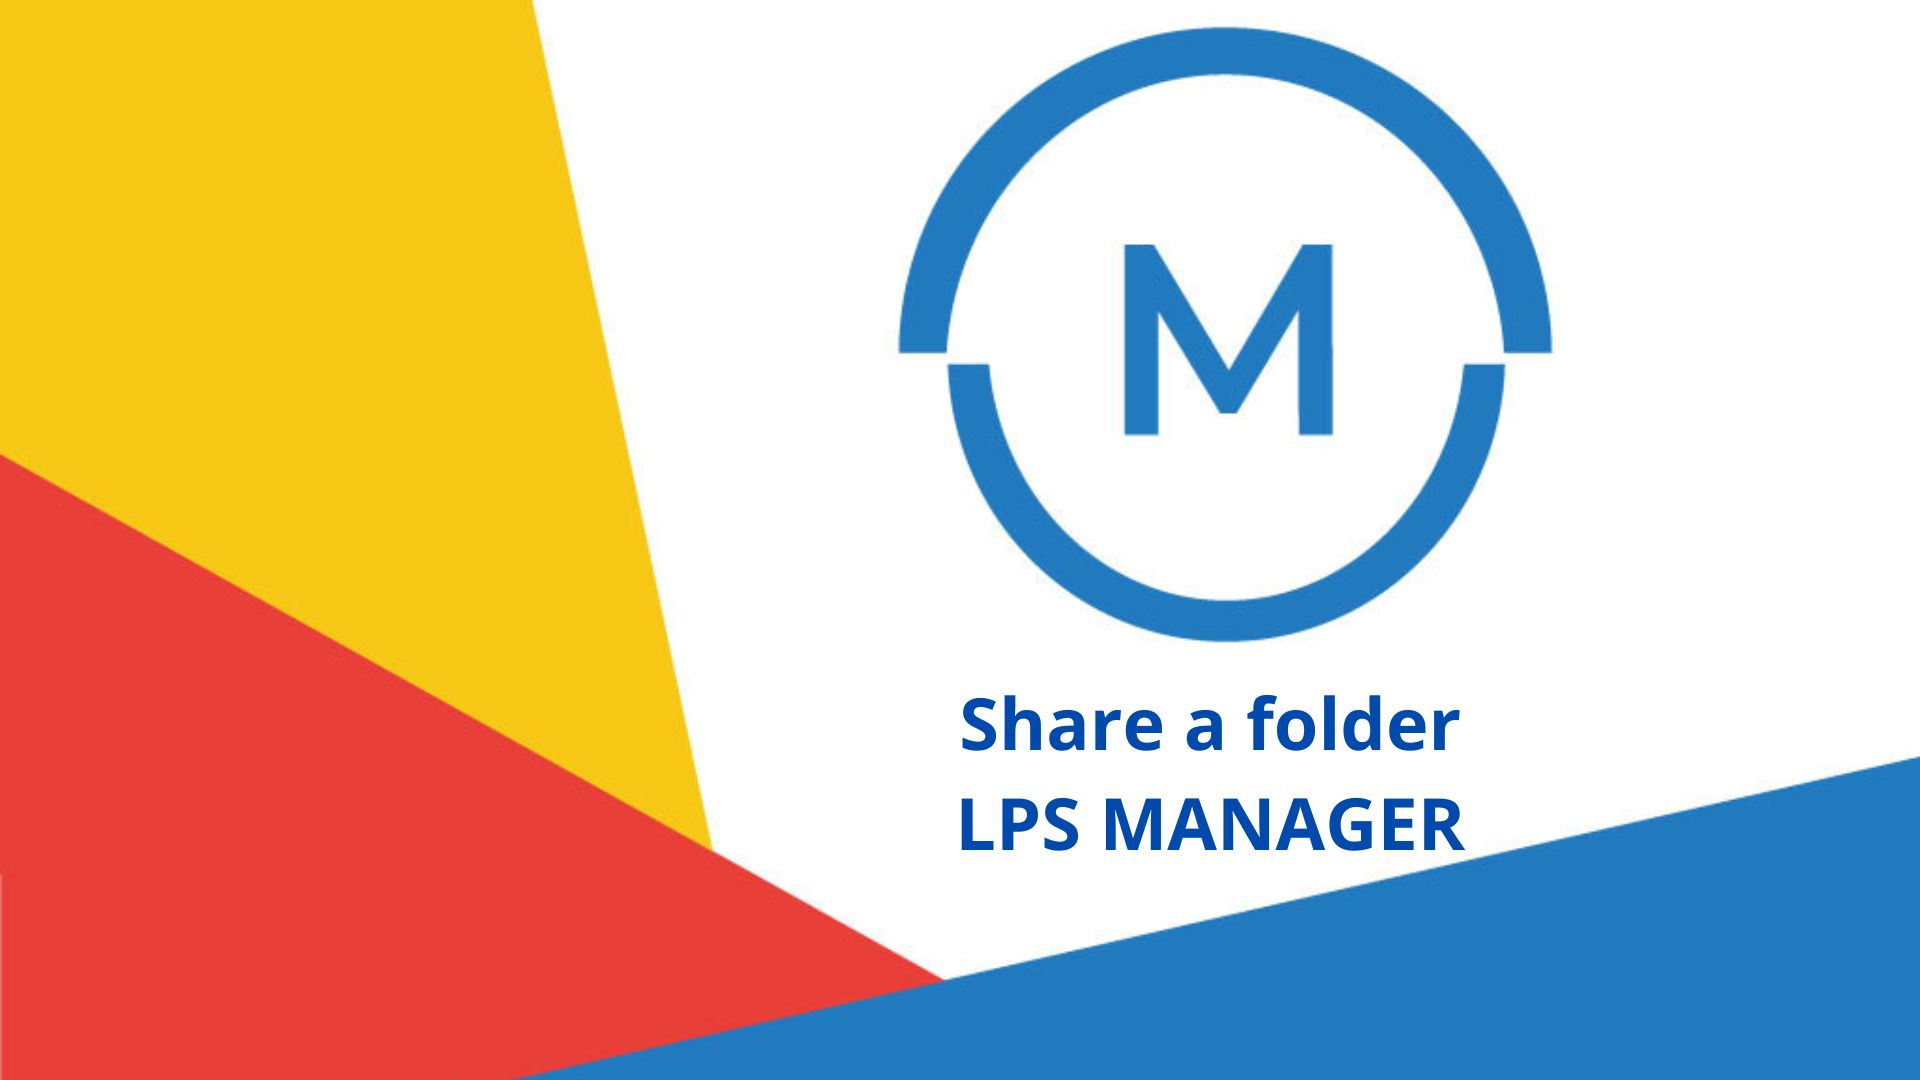 LPS Manager, share the folder of a lightning protection system